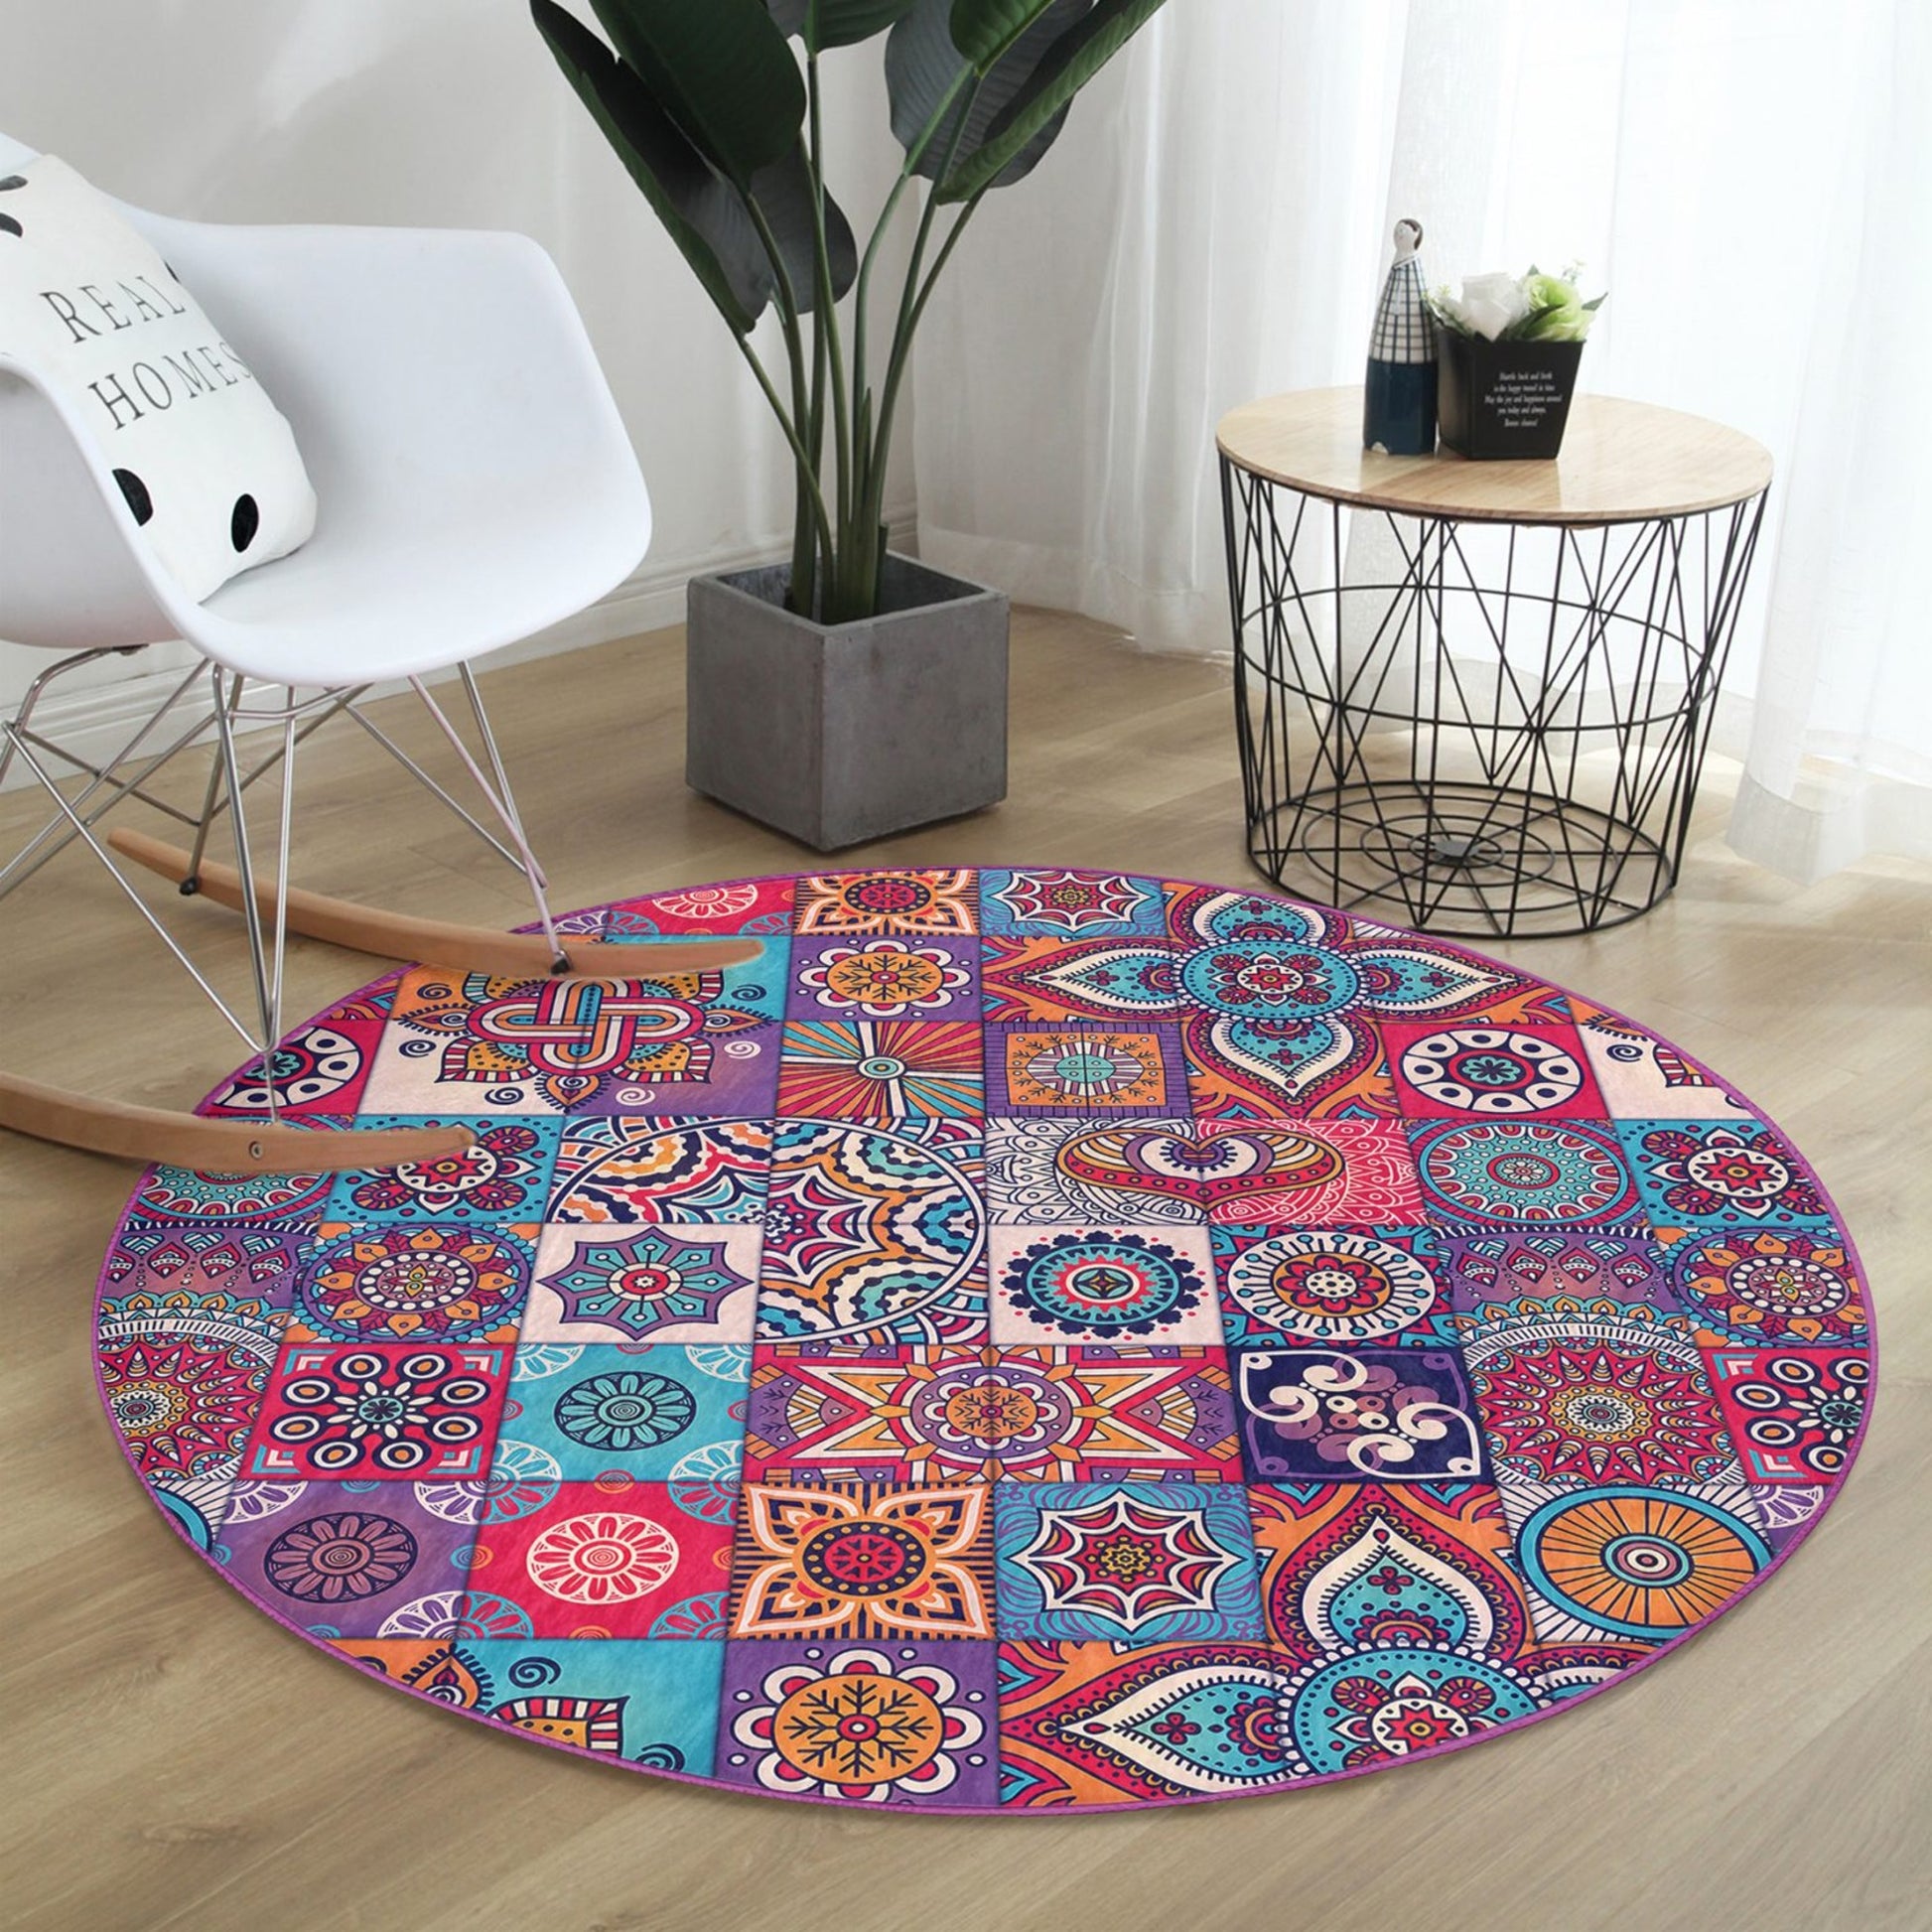 Washable Rug with Bohemian Design - Easy Maintenance